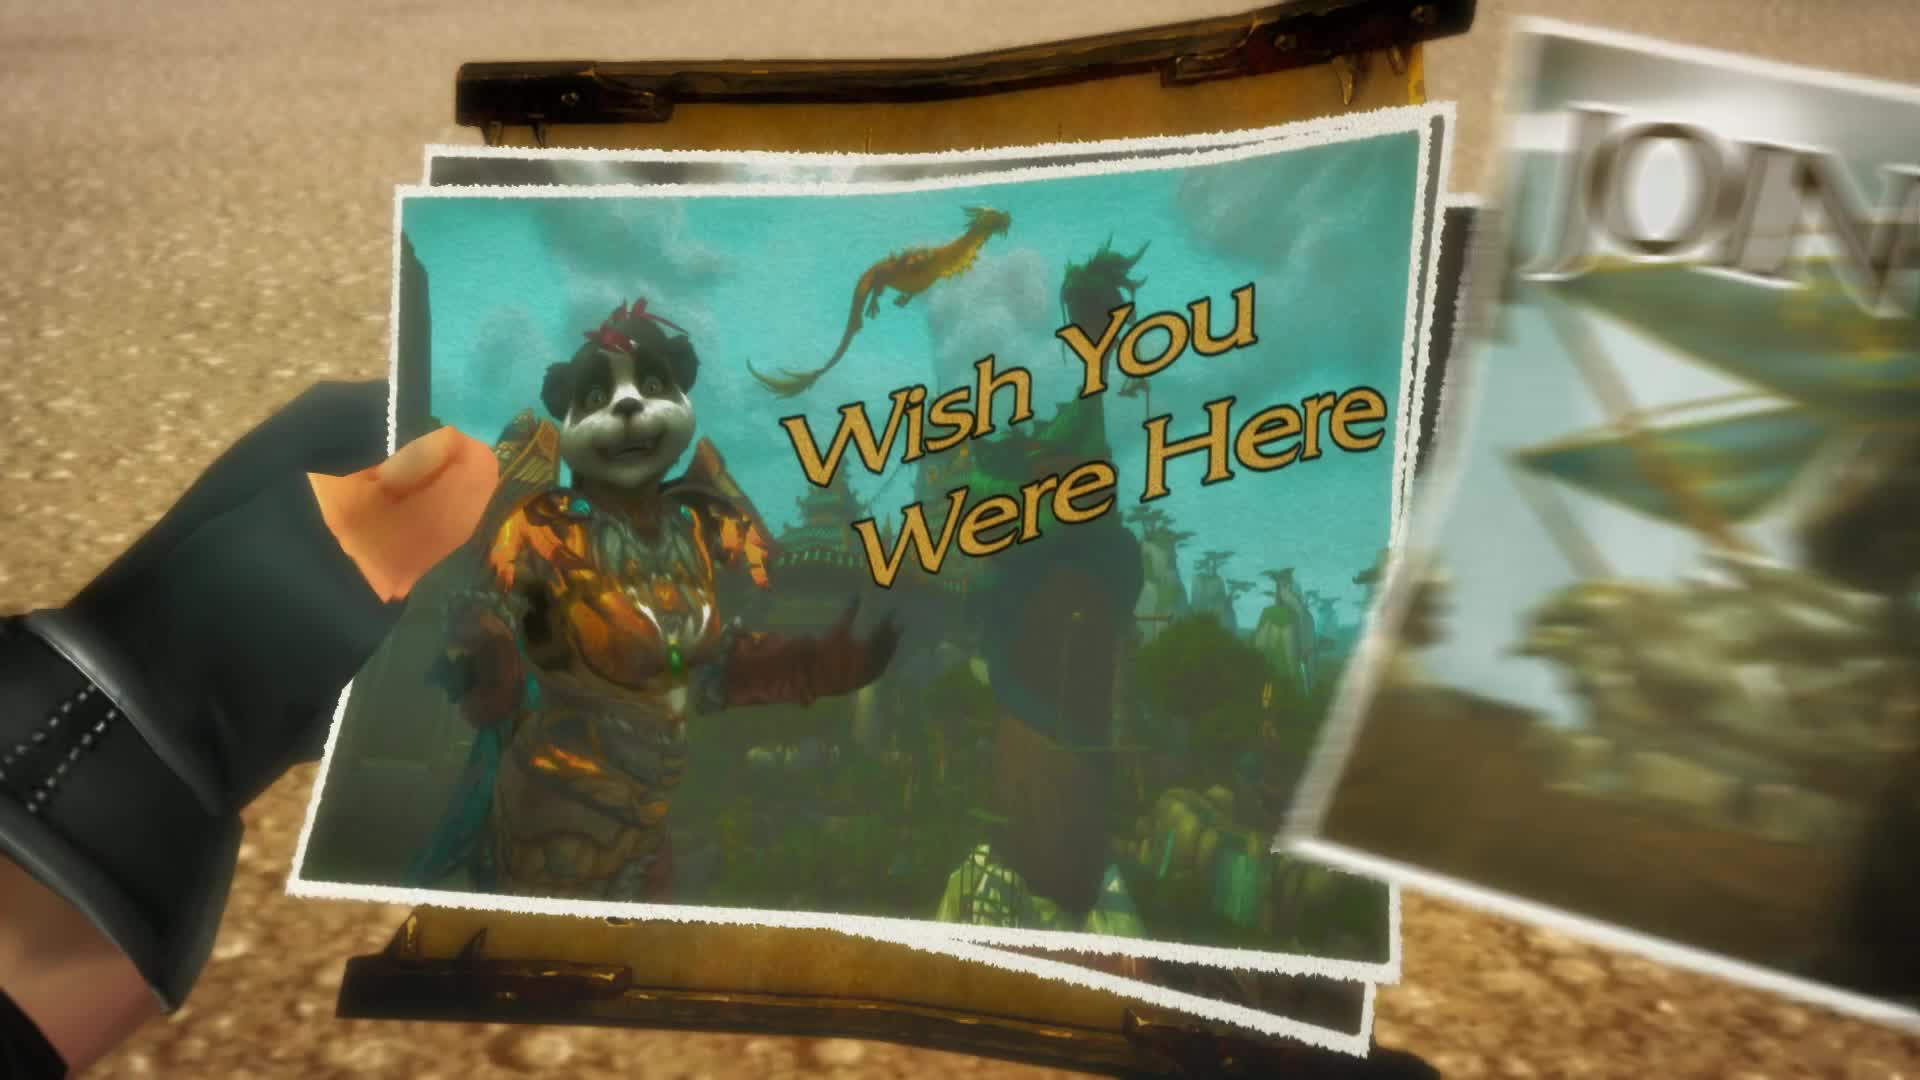 World of Warcraft - Wish you were here